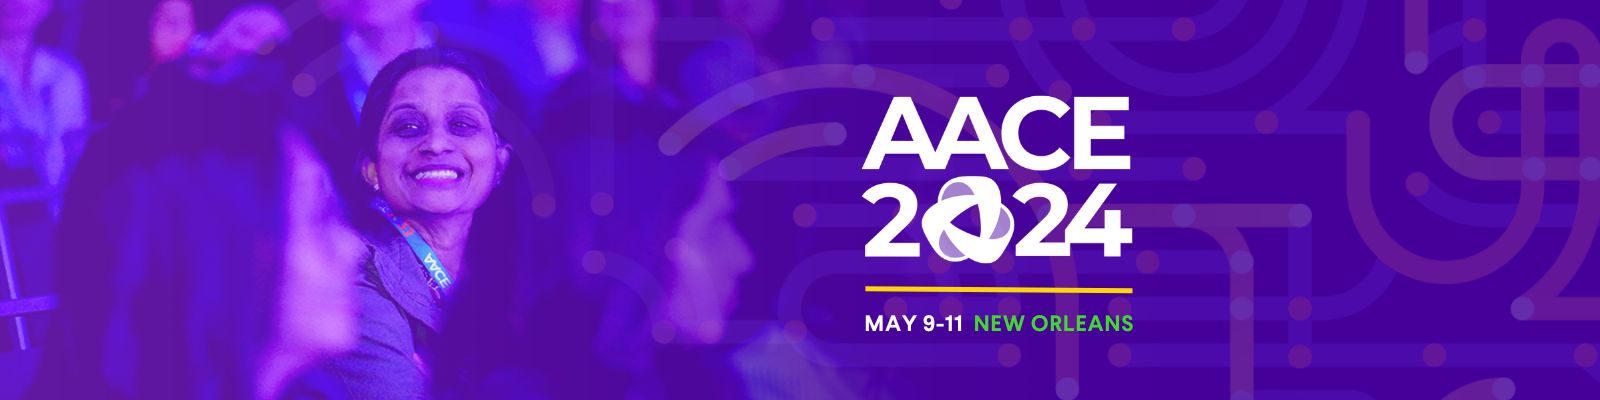 AACE 2024 Annual Meeting | American Association of Clinical Endocrinology